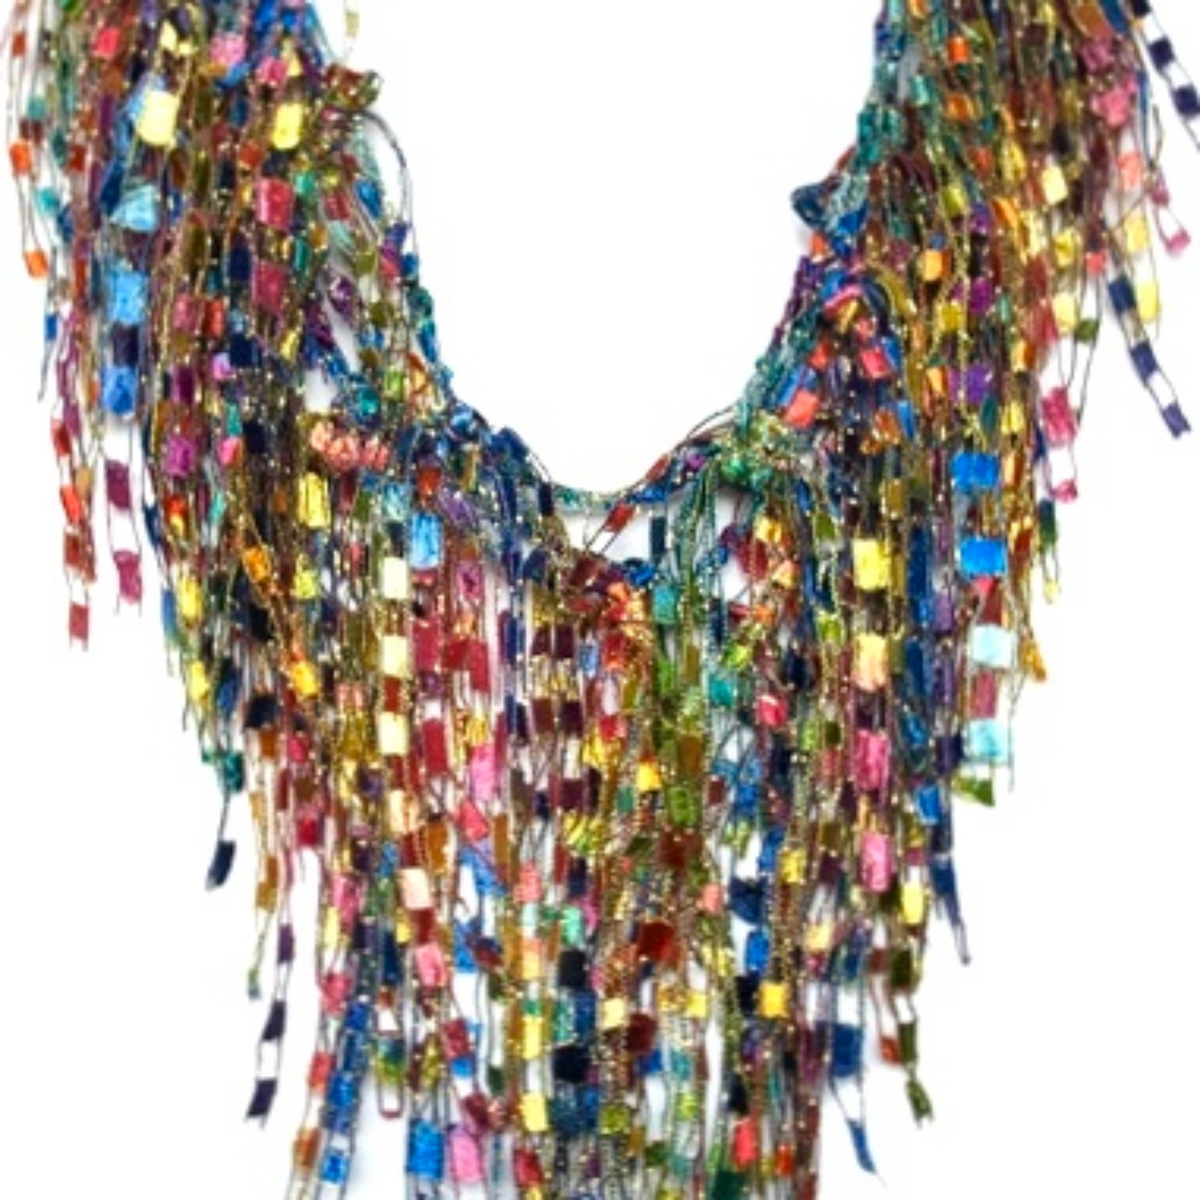 Close up of multicolor statement necklace scarf showing details of the metallic yarns materials